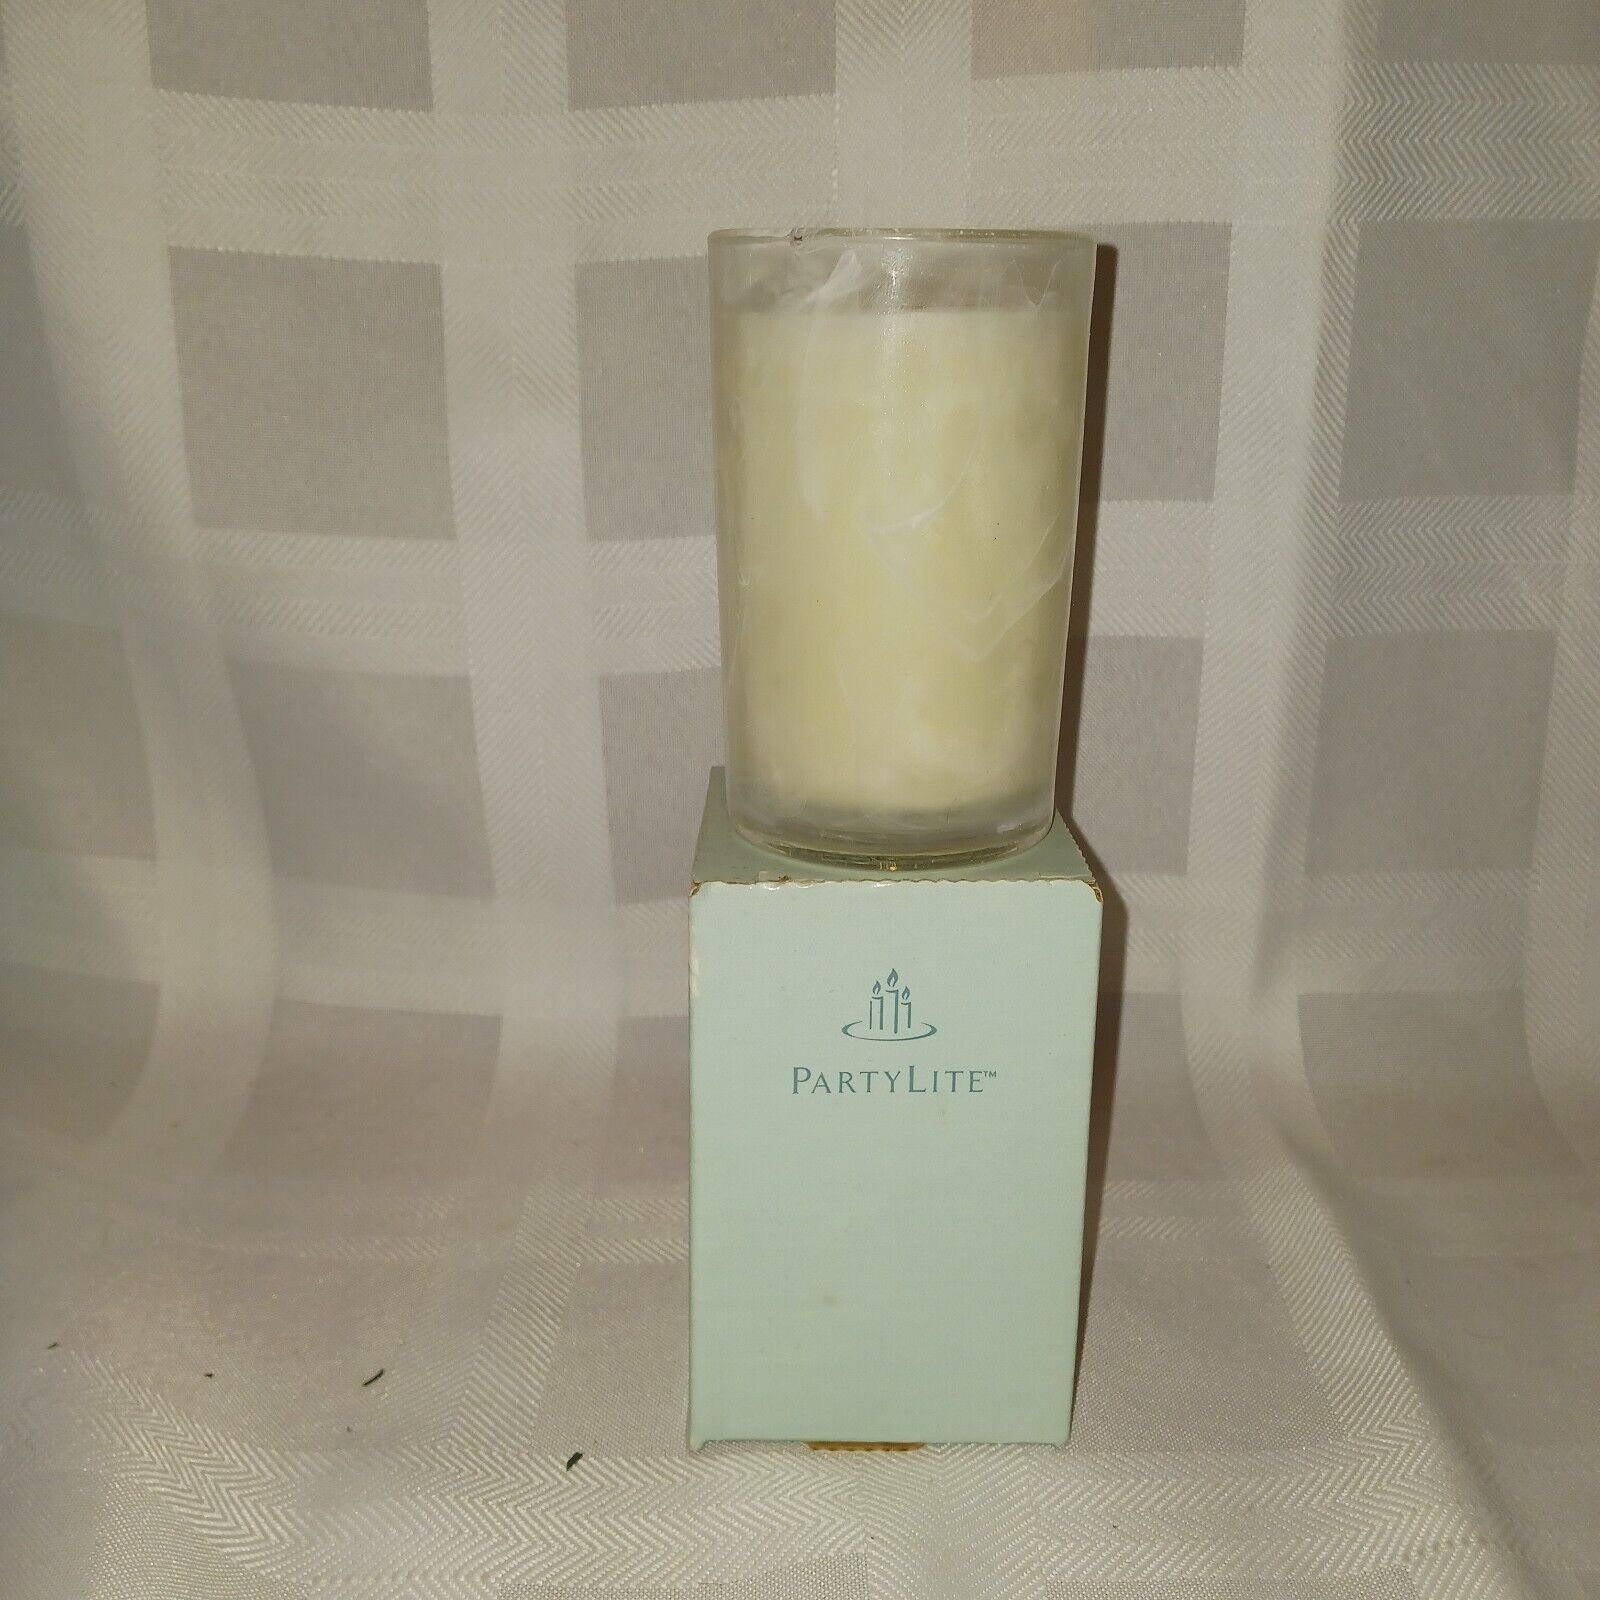 Partylite Retired Scented Wax-Filled Glass Indulgences P50141